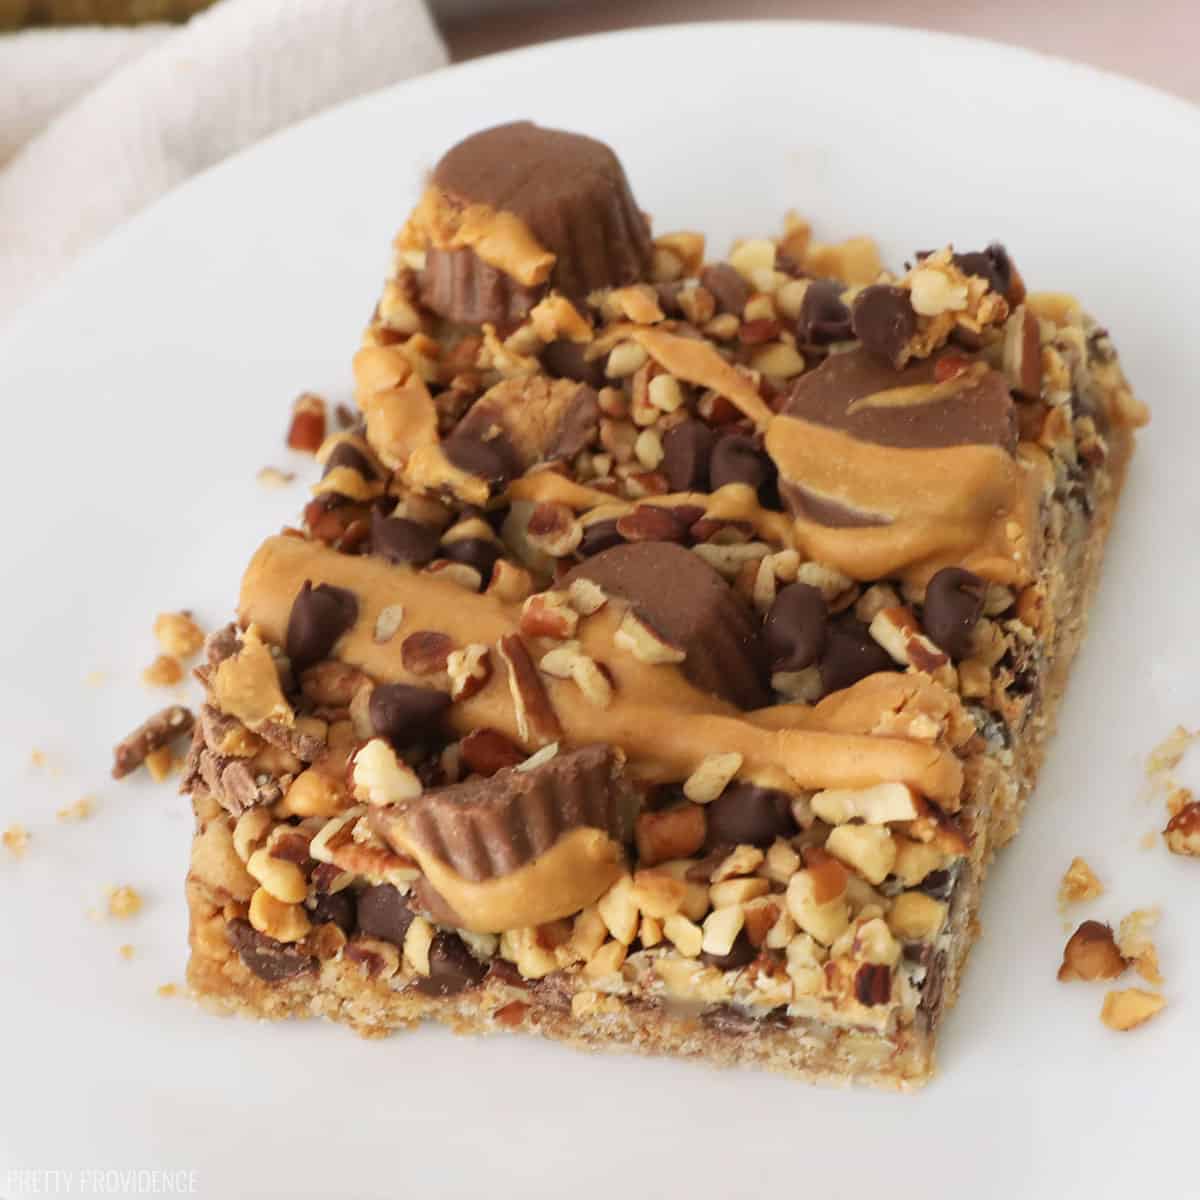 Peanut Butter Magic Bar, with mini Peanut butter cups and peanut butter drizzled on top, close up on a white plate.